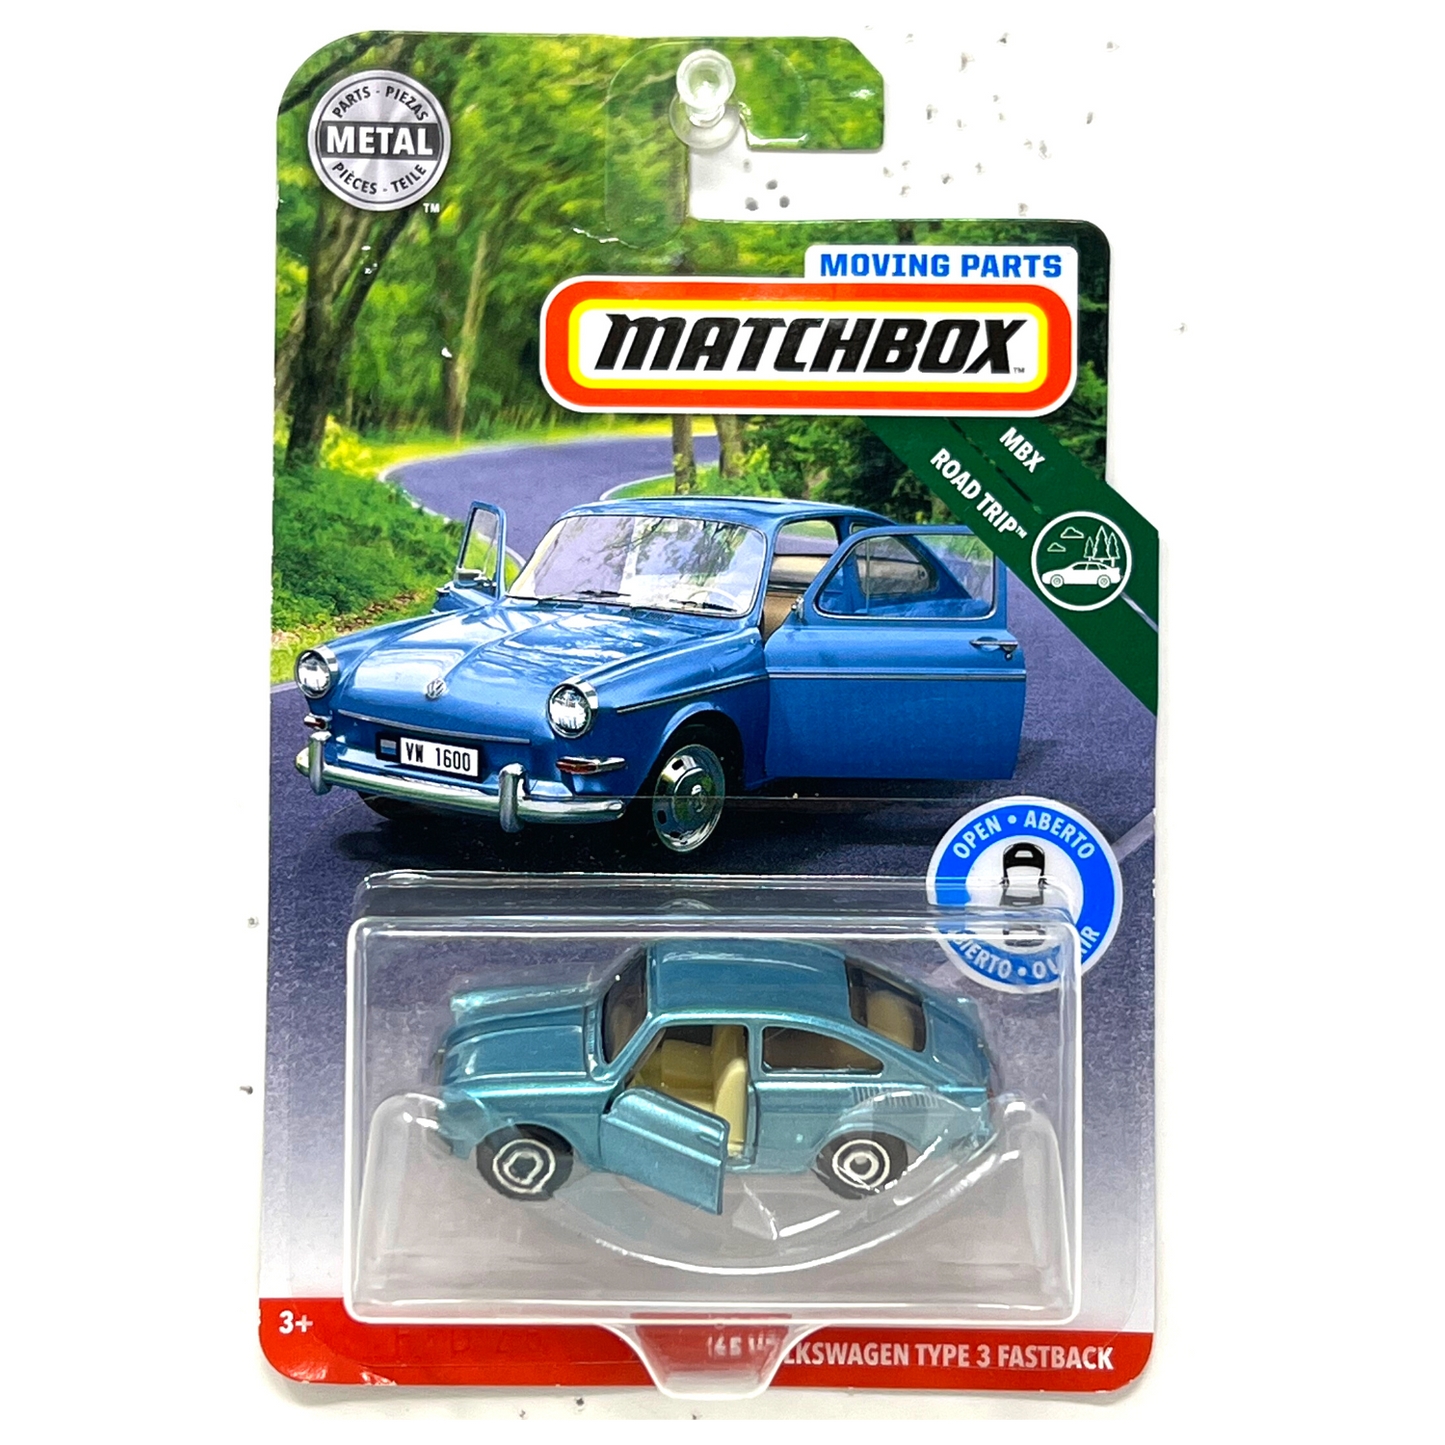 Matchbox Moving Parts MBX Road Trip '65 Volkswagen Type 3 Fastback 1:64 Diecast